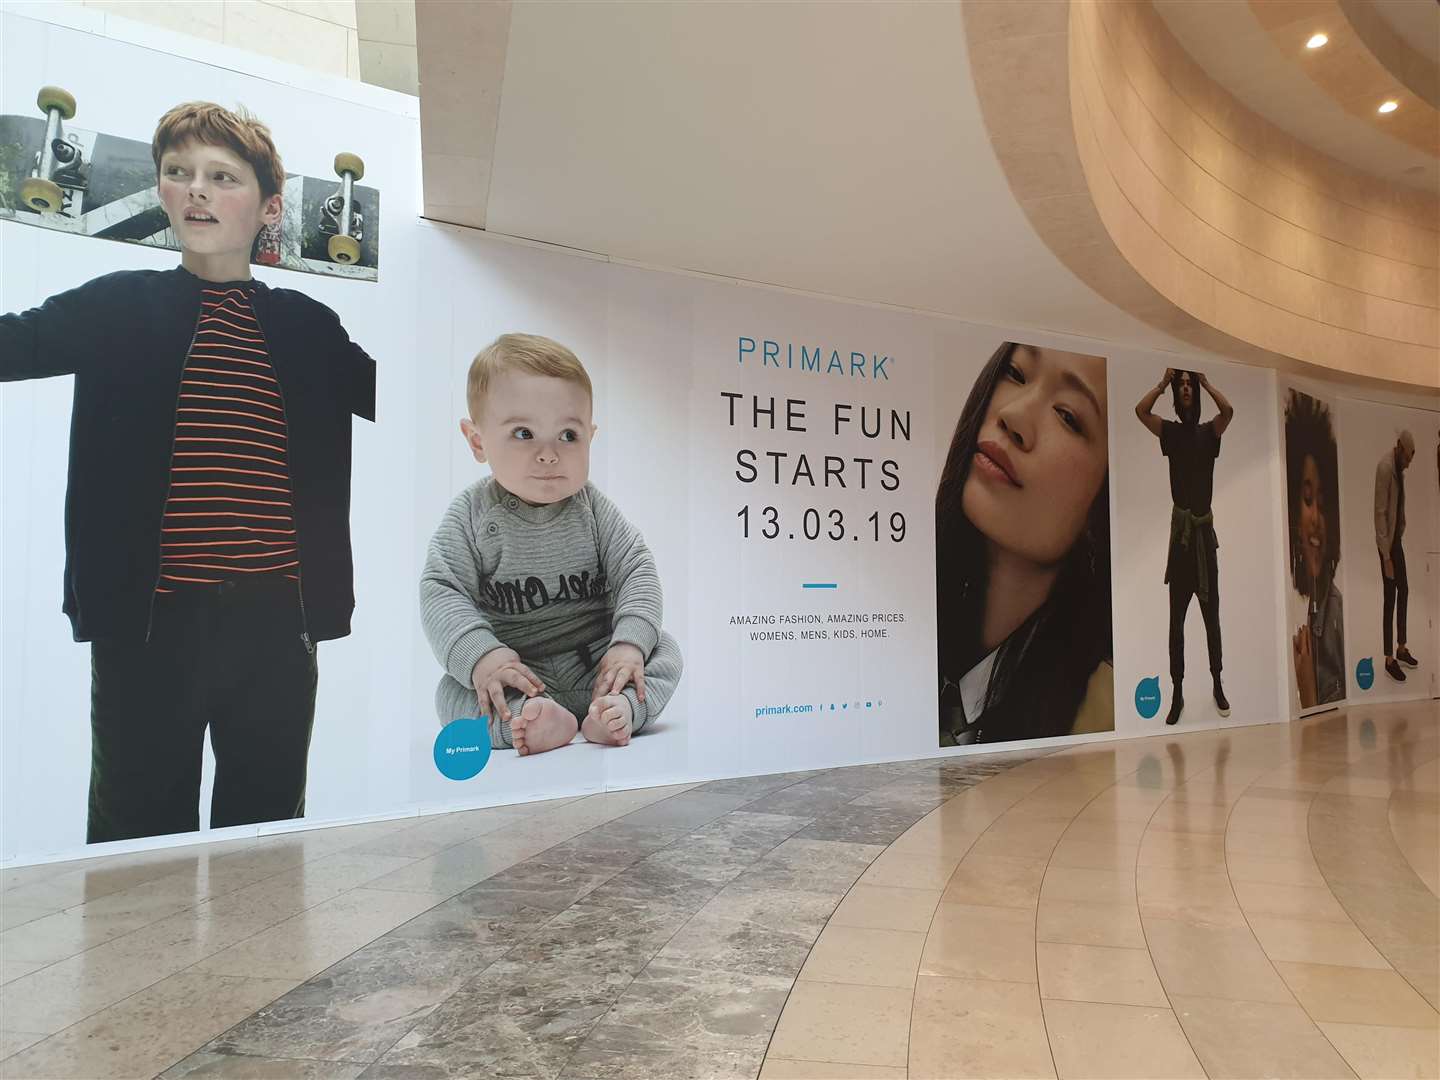 Primark is set to open in Bluewater on Wednesday, March 13